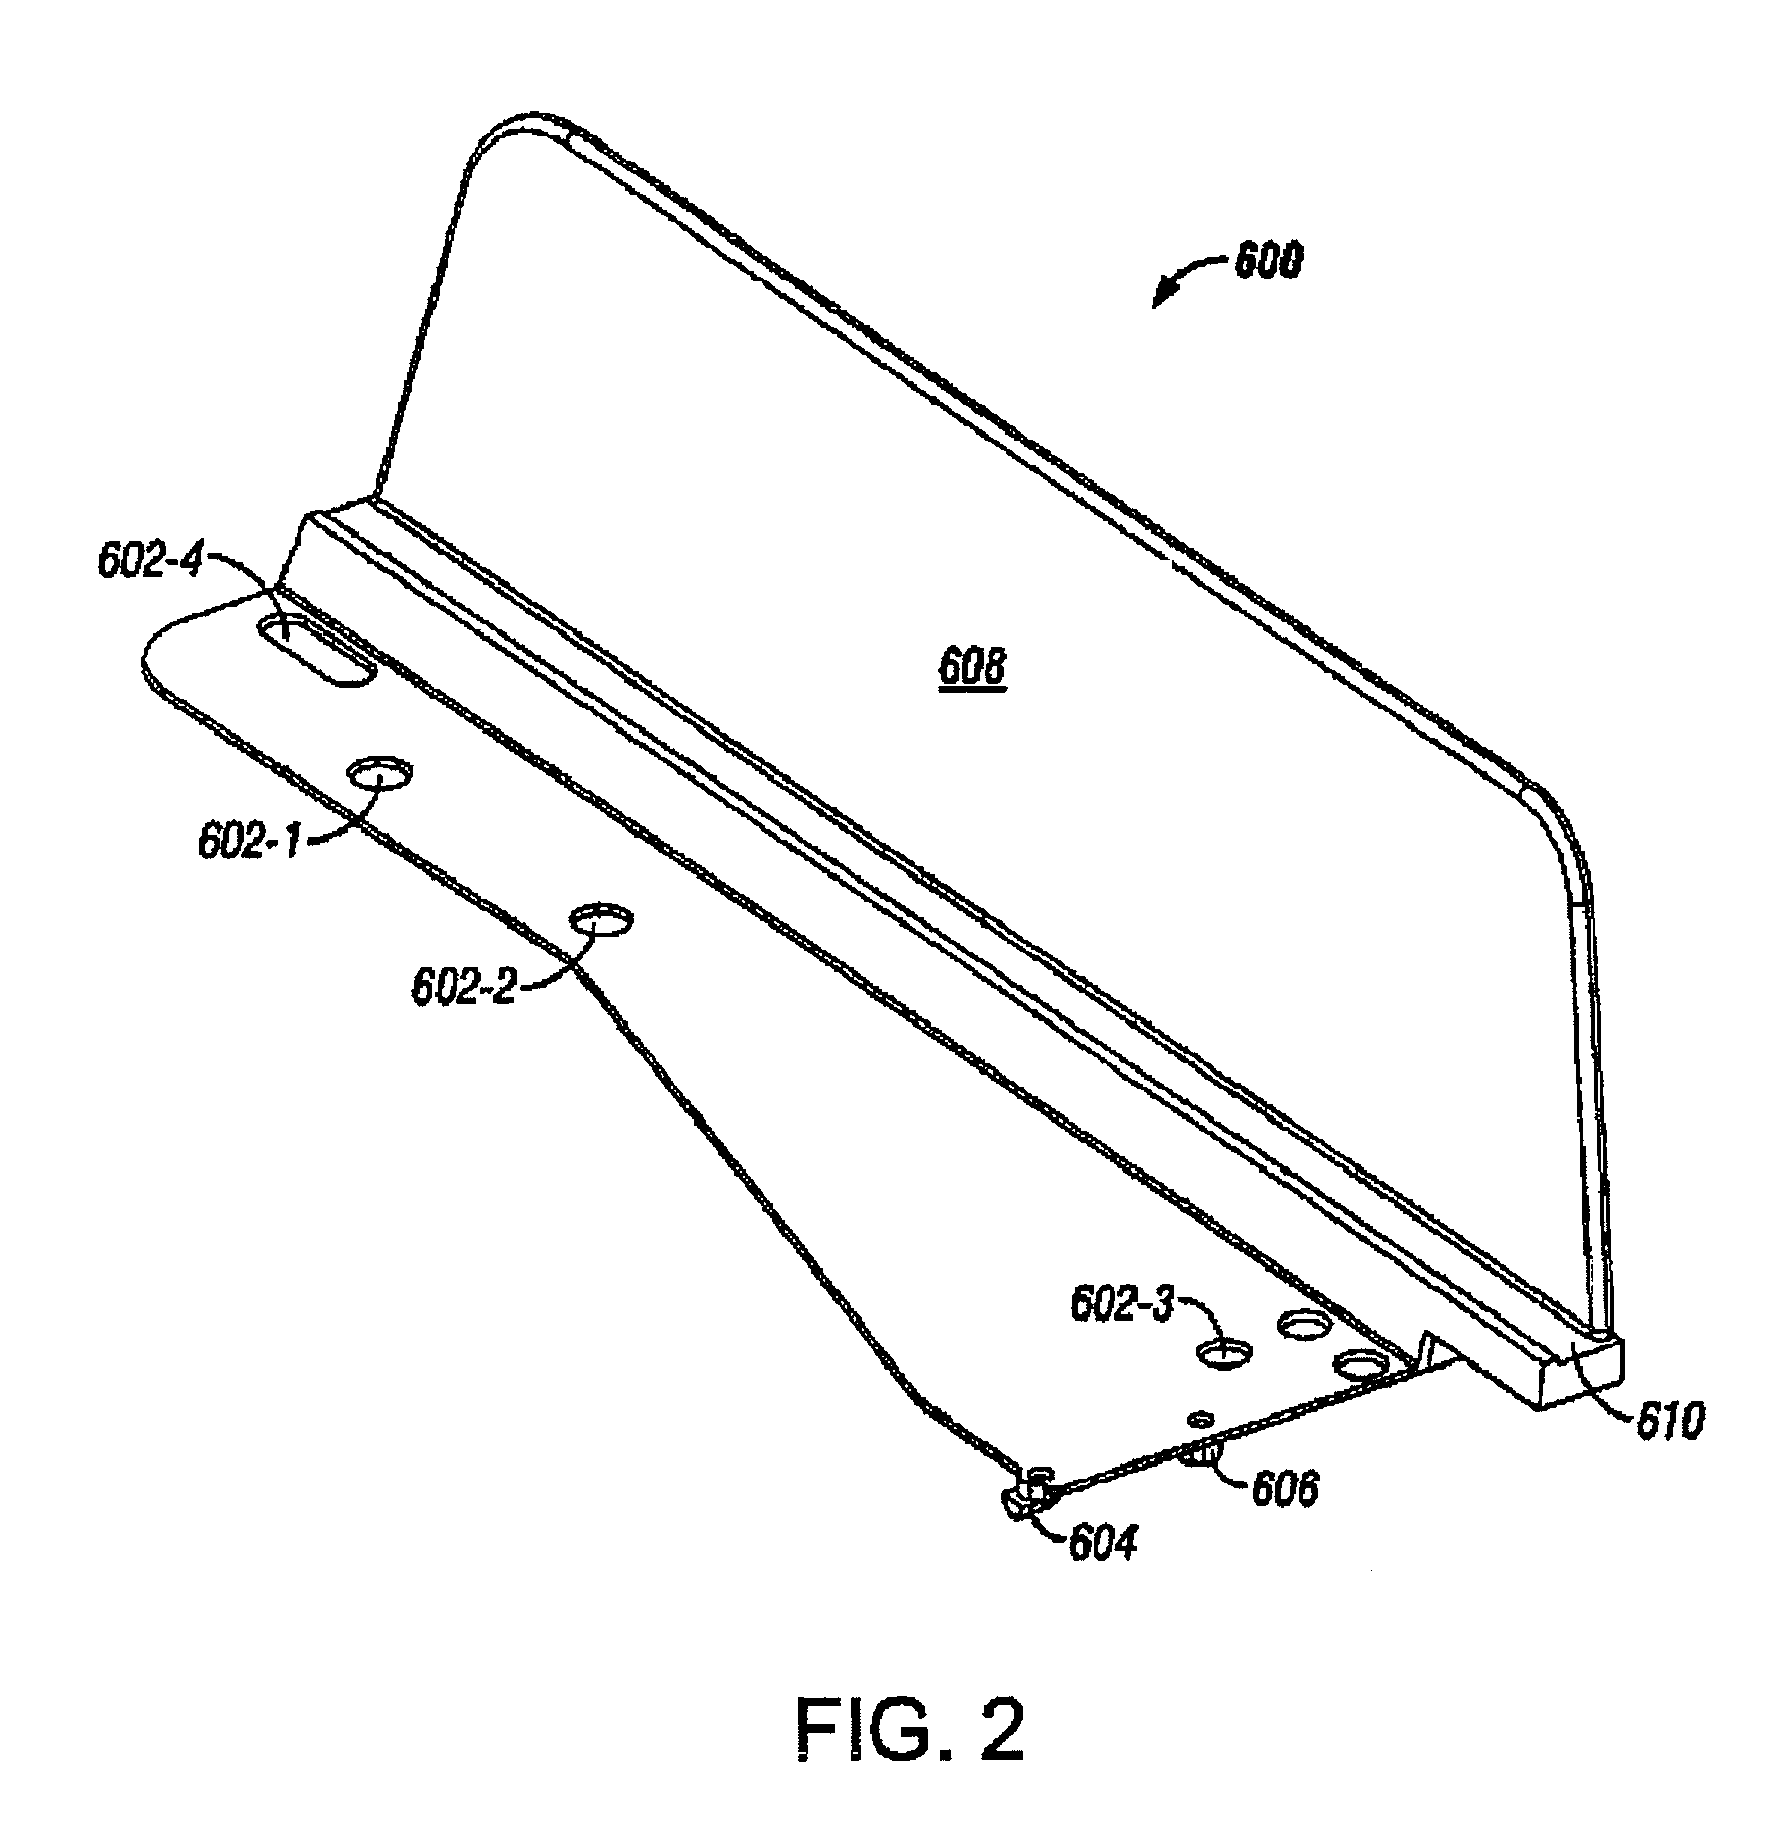 Product management display system with retaining wall